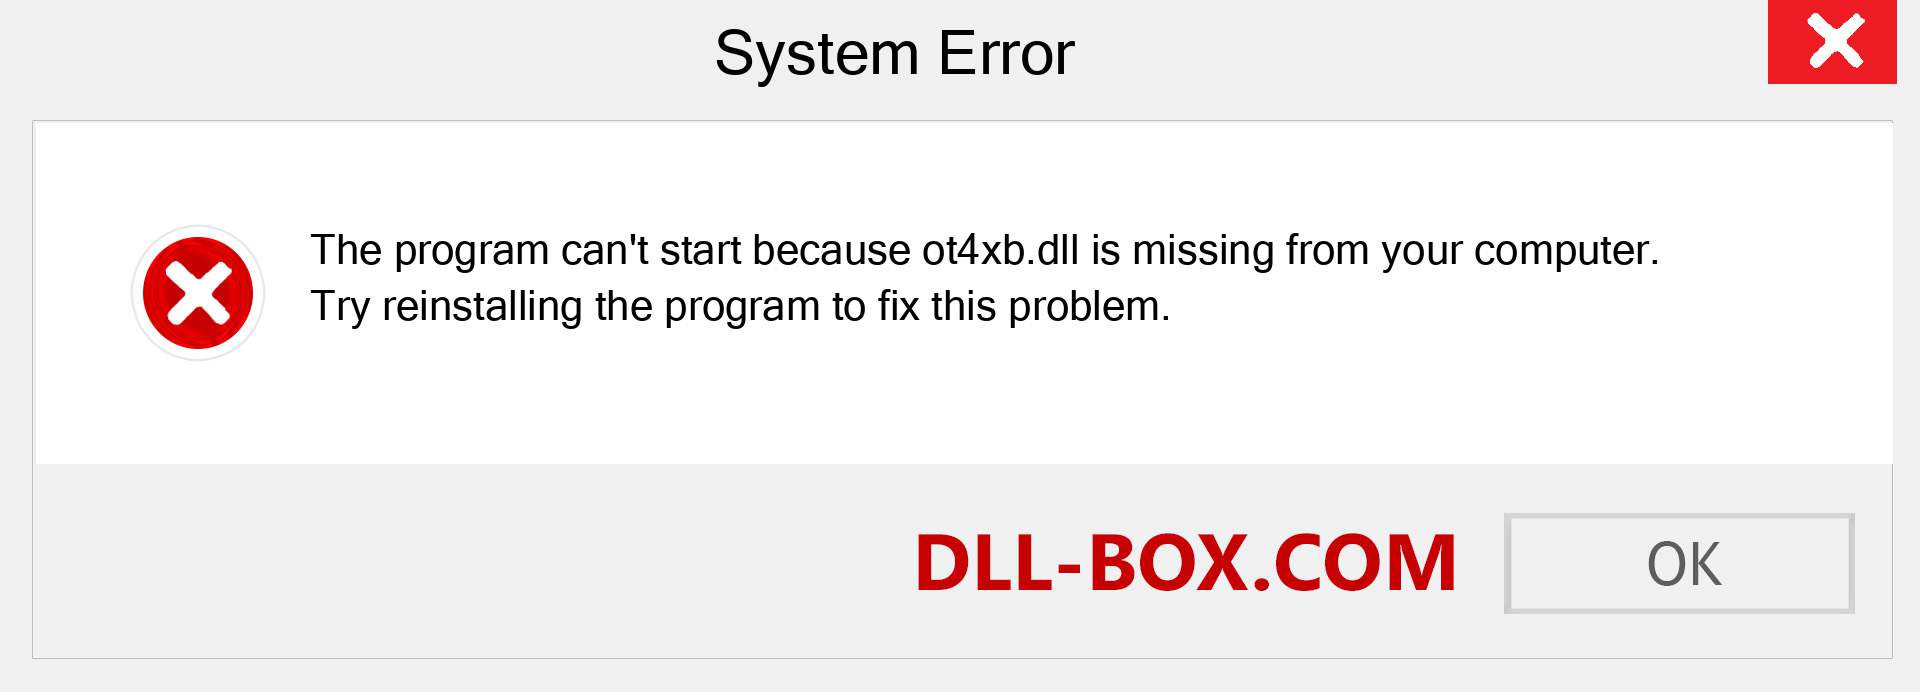  ot4xb.dll file is missing?. Download for Windows 7, 8, 10 - Fix  ot4xb dll Missing Error on Windows, photos, images